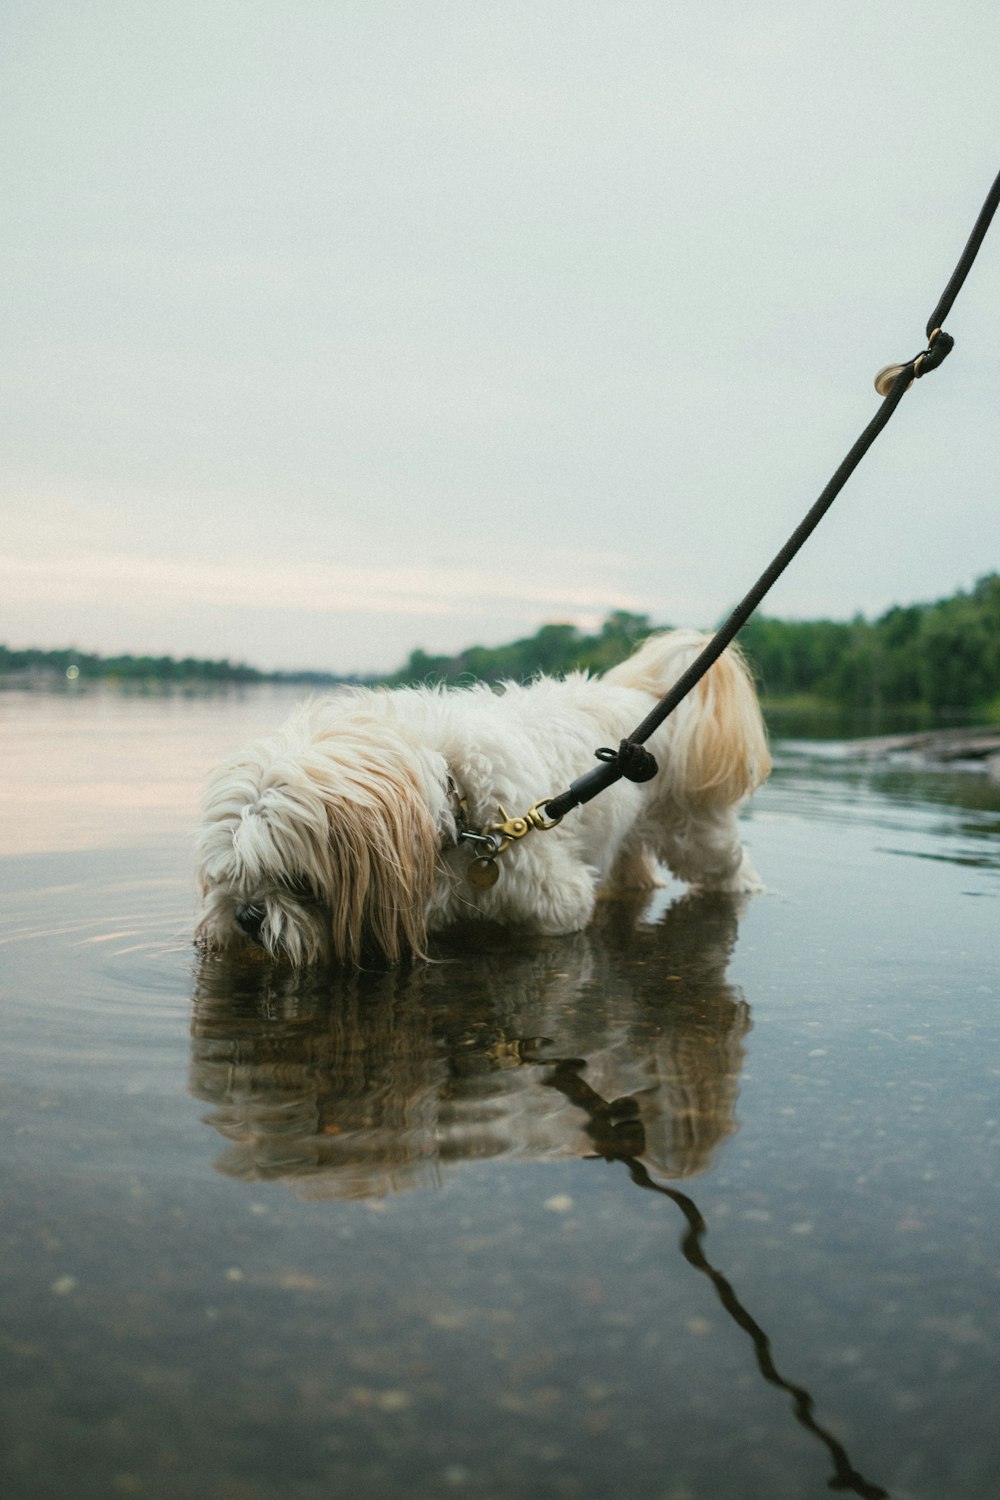 a small white dog on a leash in the water